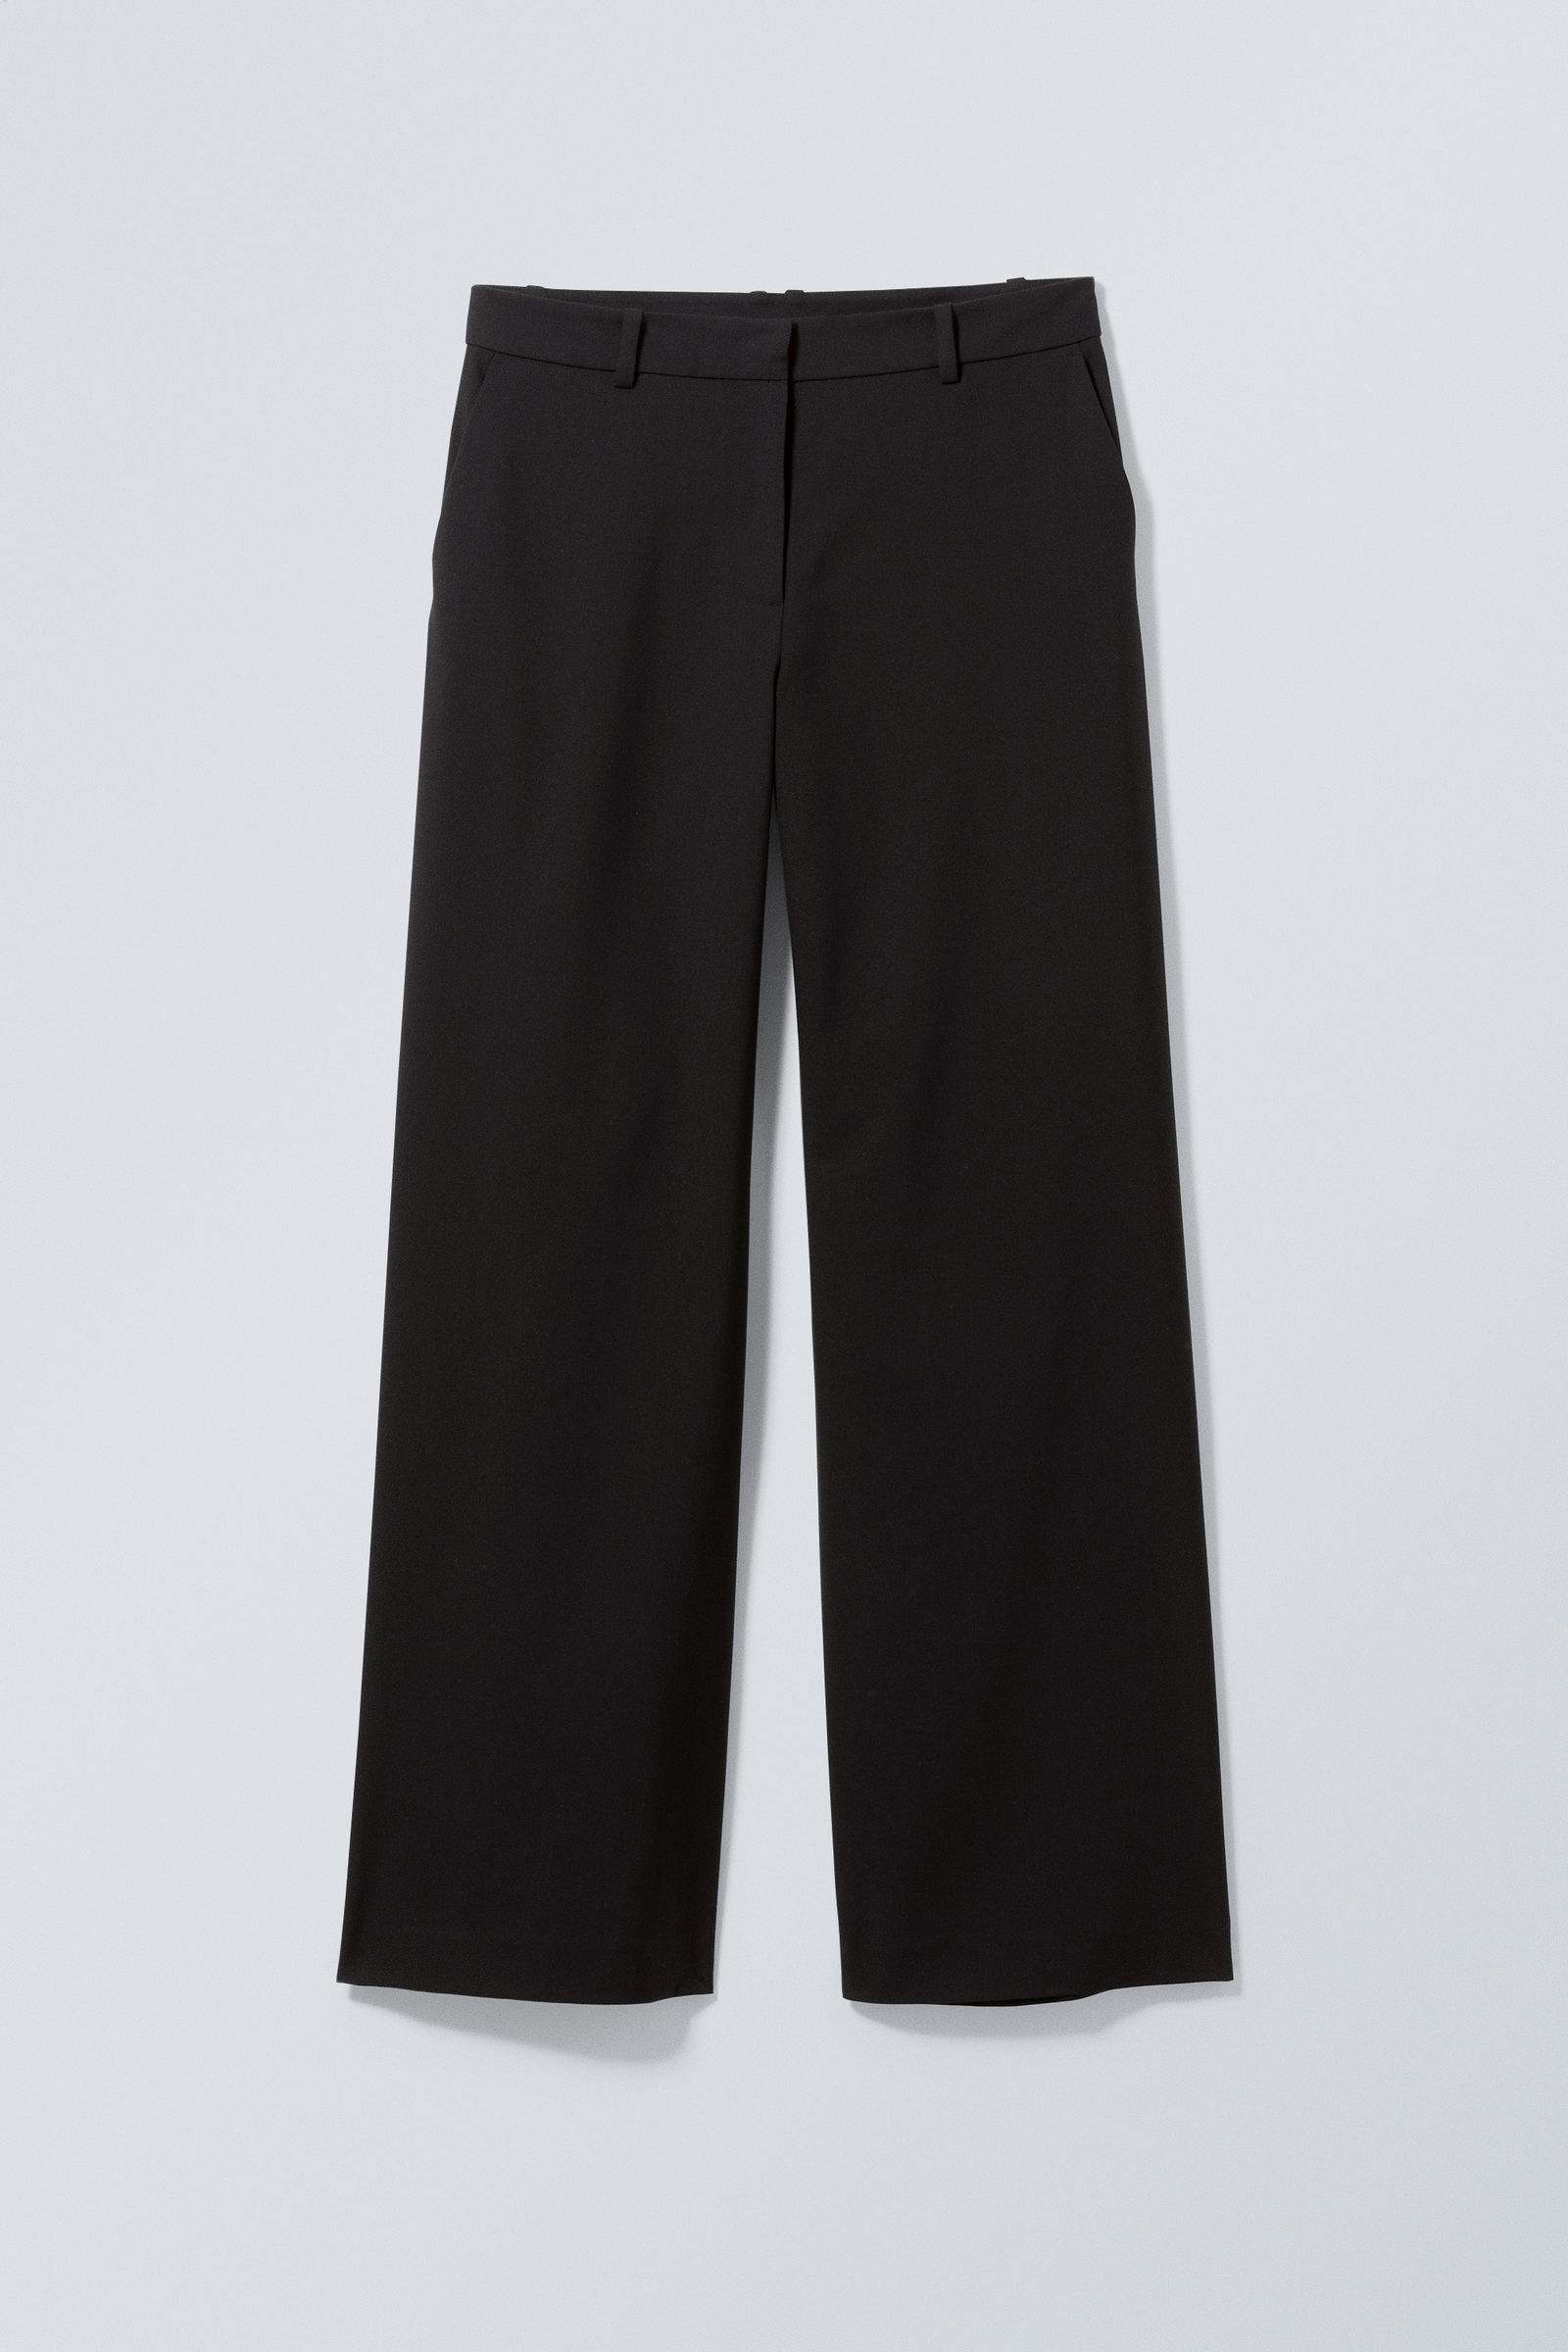 #272628 - Emily Low Waist Suiting Trousers - 1